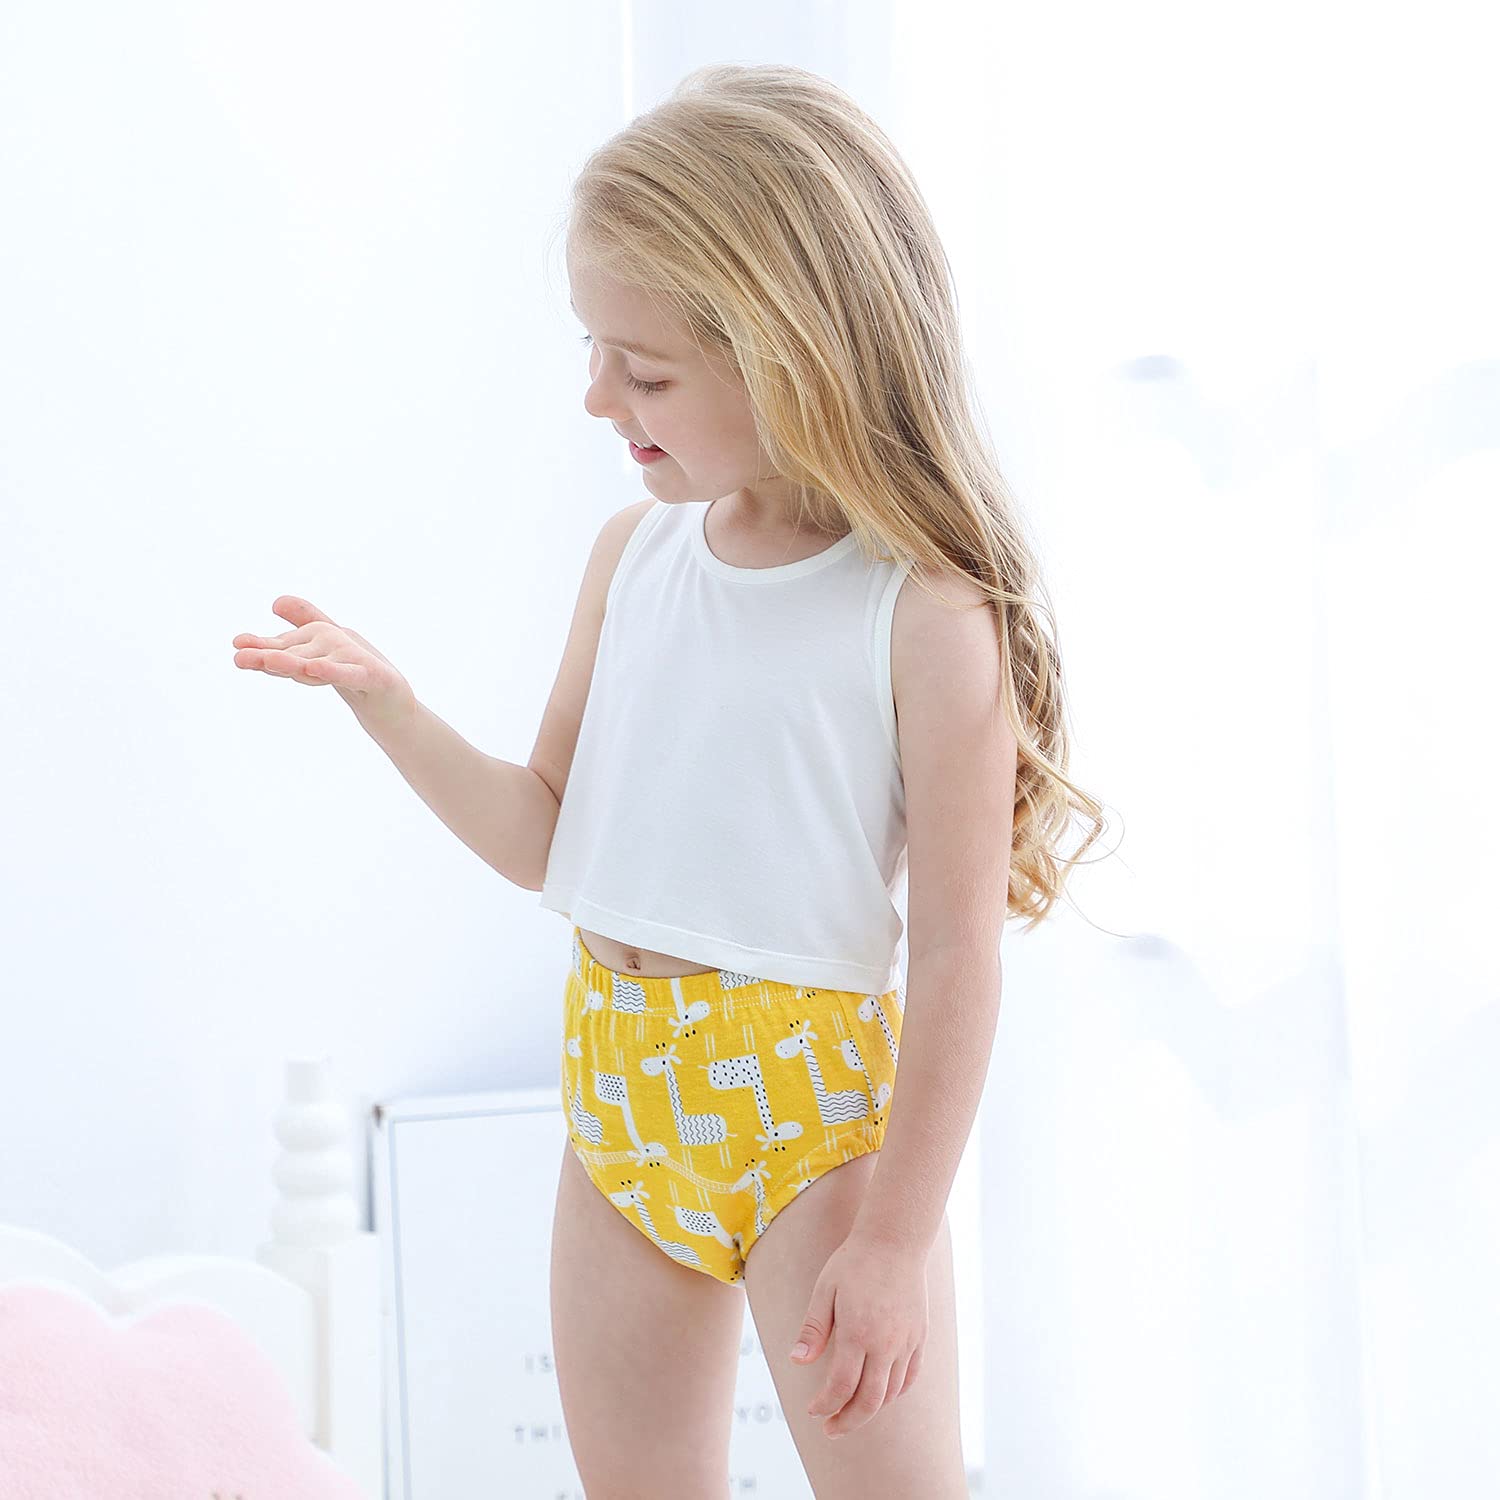 (🔥HOT SALE TODAY - 49% OFF) Baby Potty Training Underwear